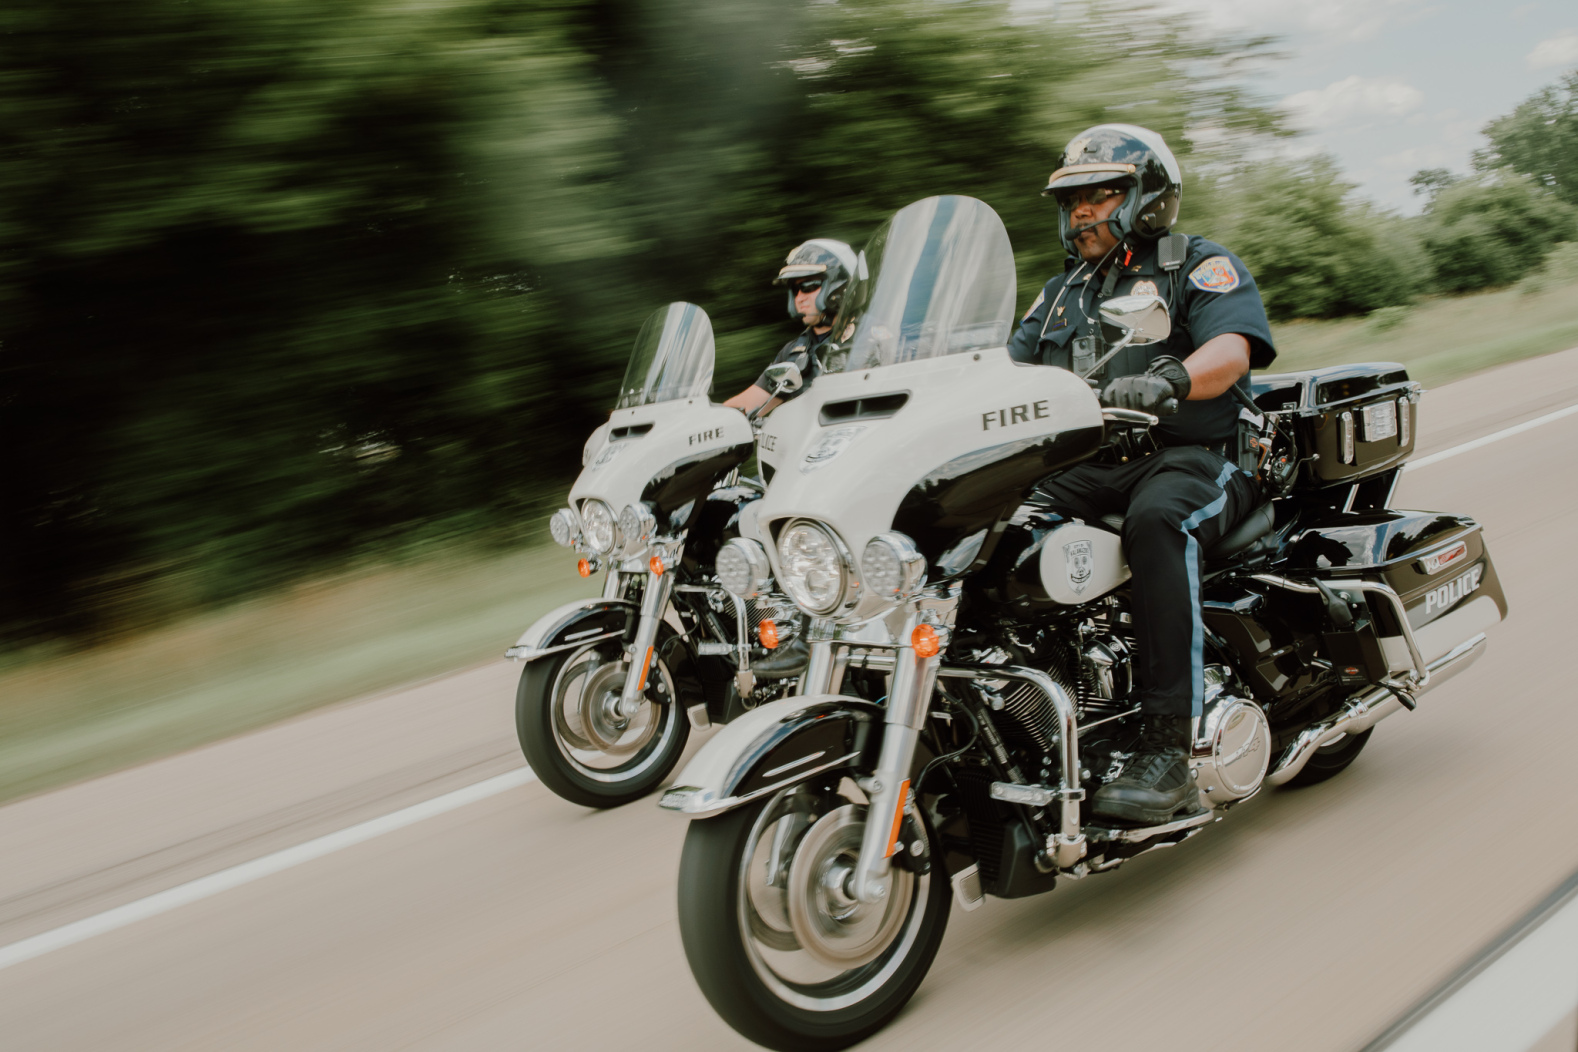 A photo of two Public Safety Officers riding motorcycles